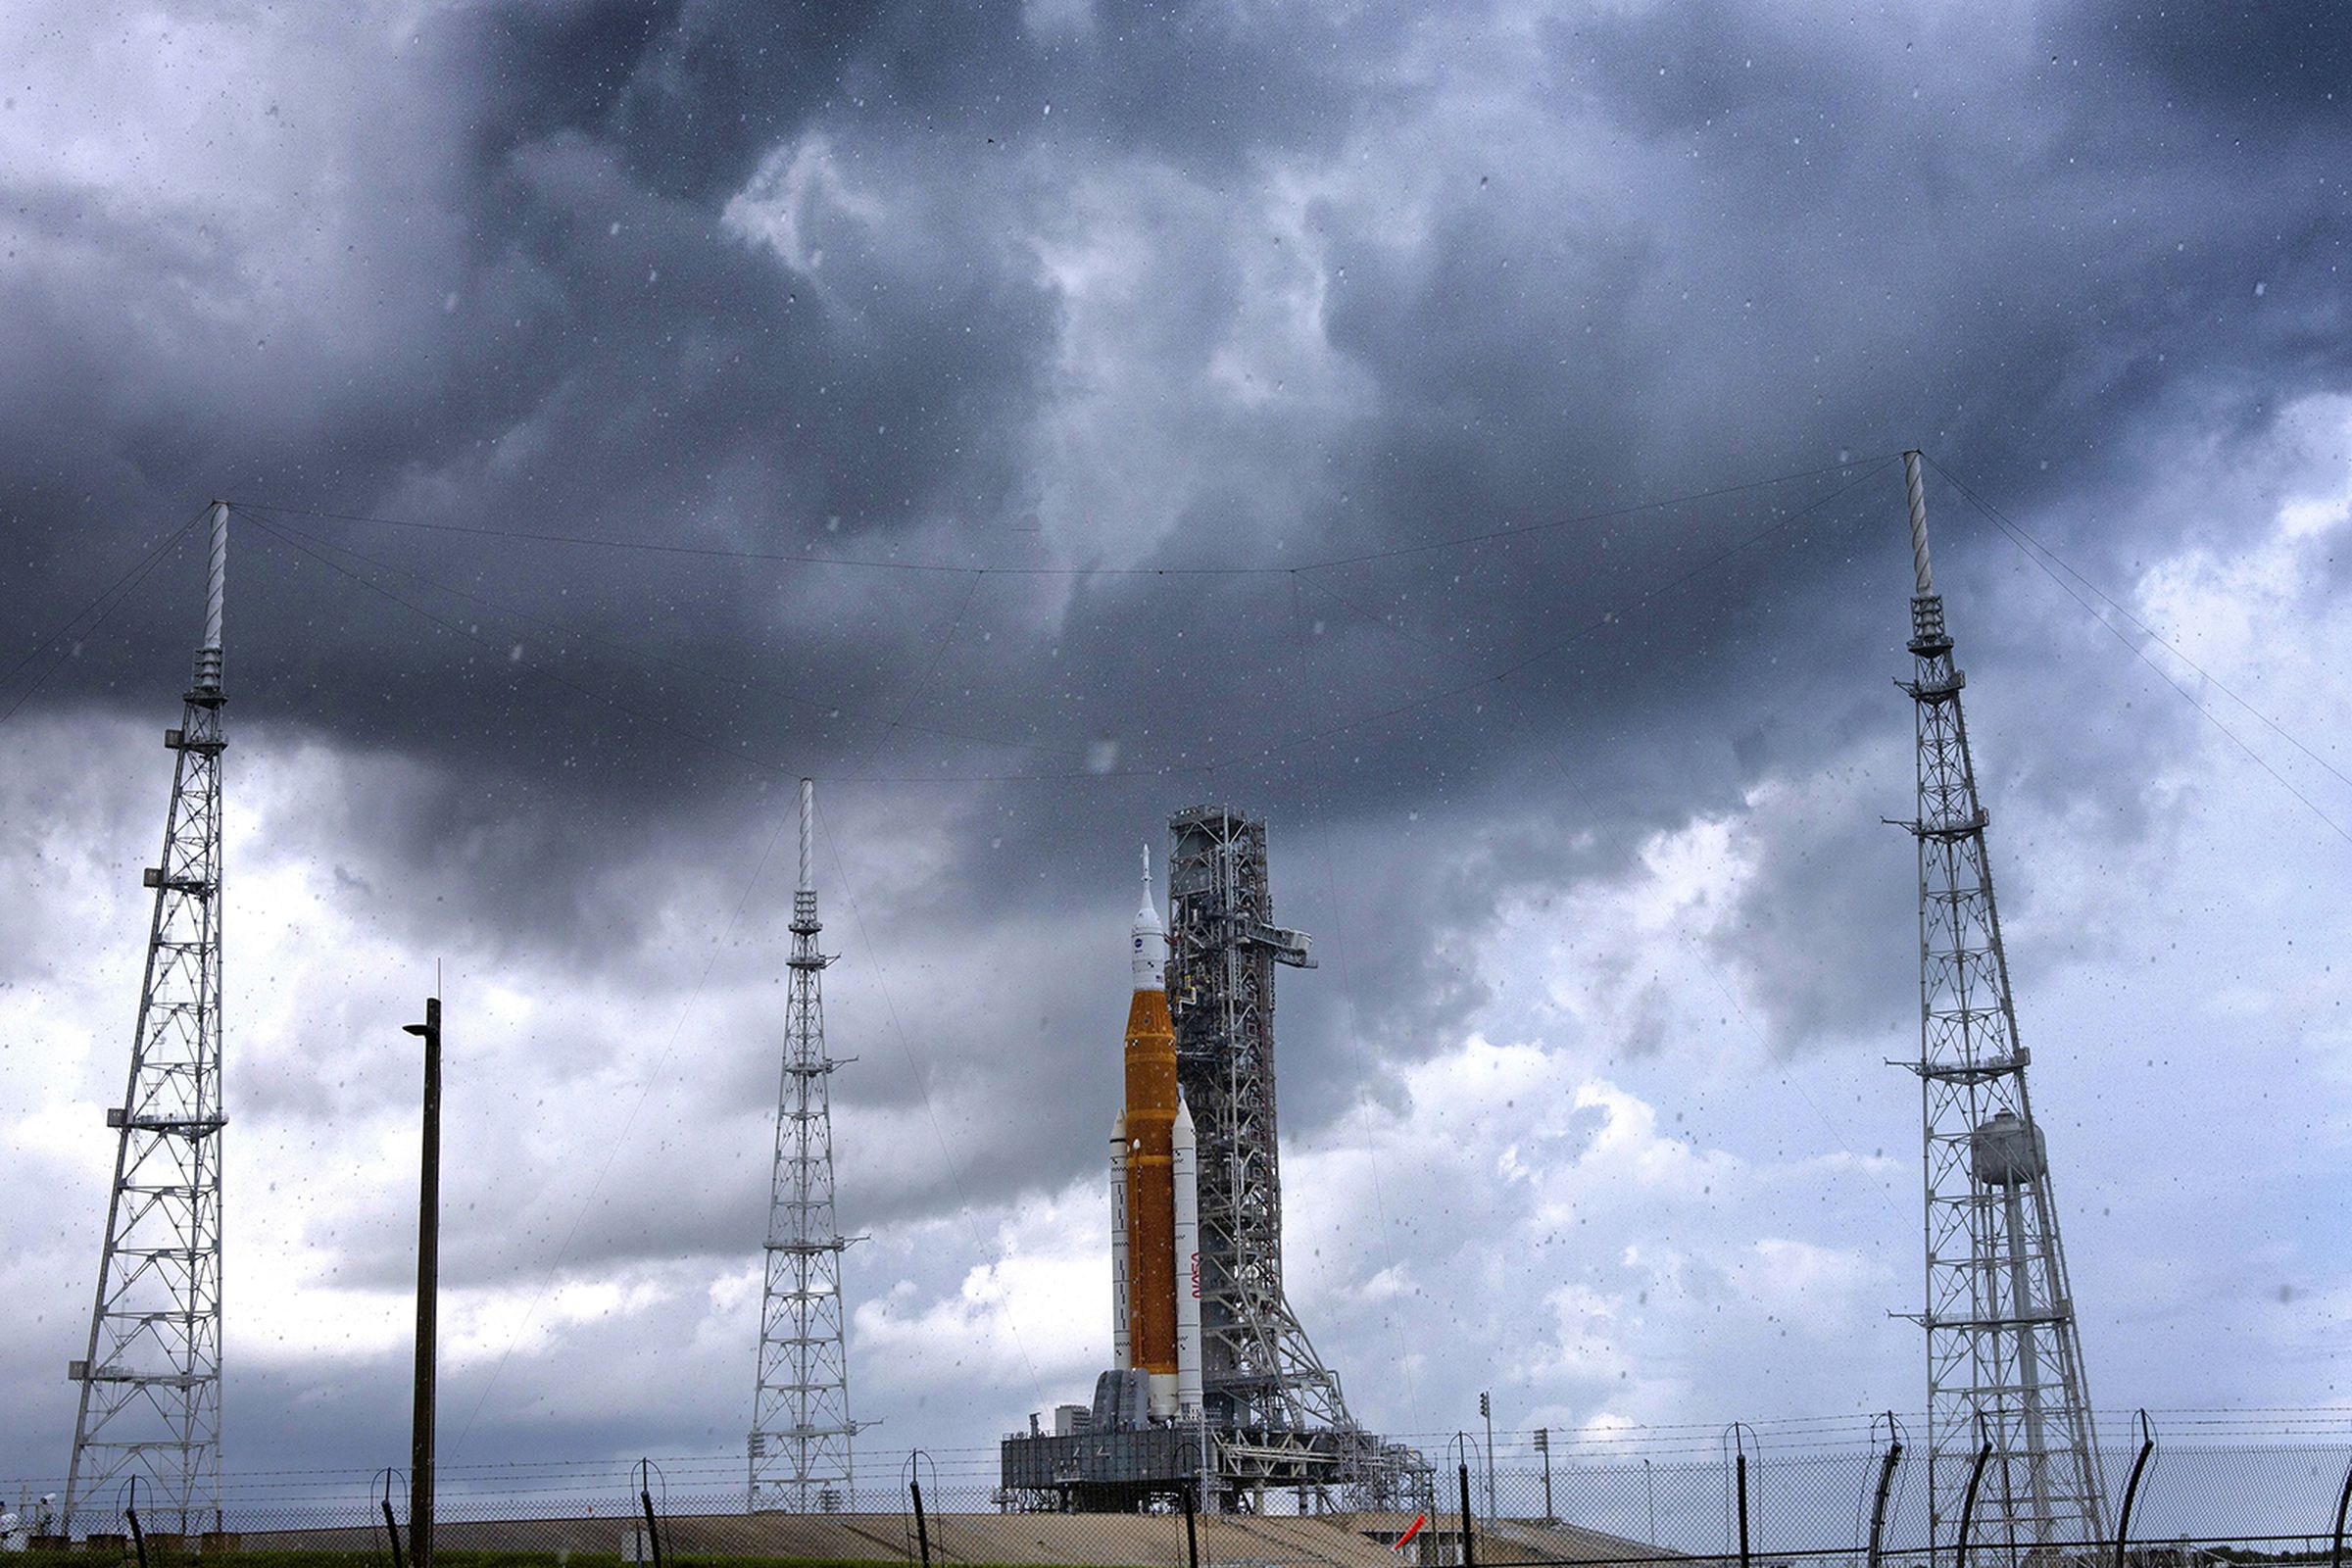 Dark clouds loom over the Artemis I rocket as it sits on a launch pad at Kennedy Space Center.